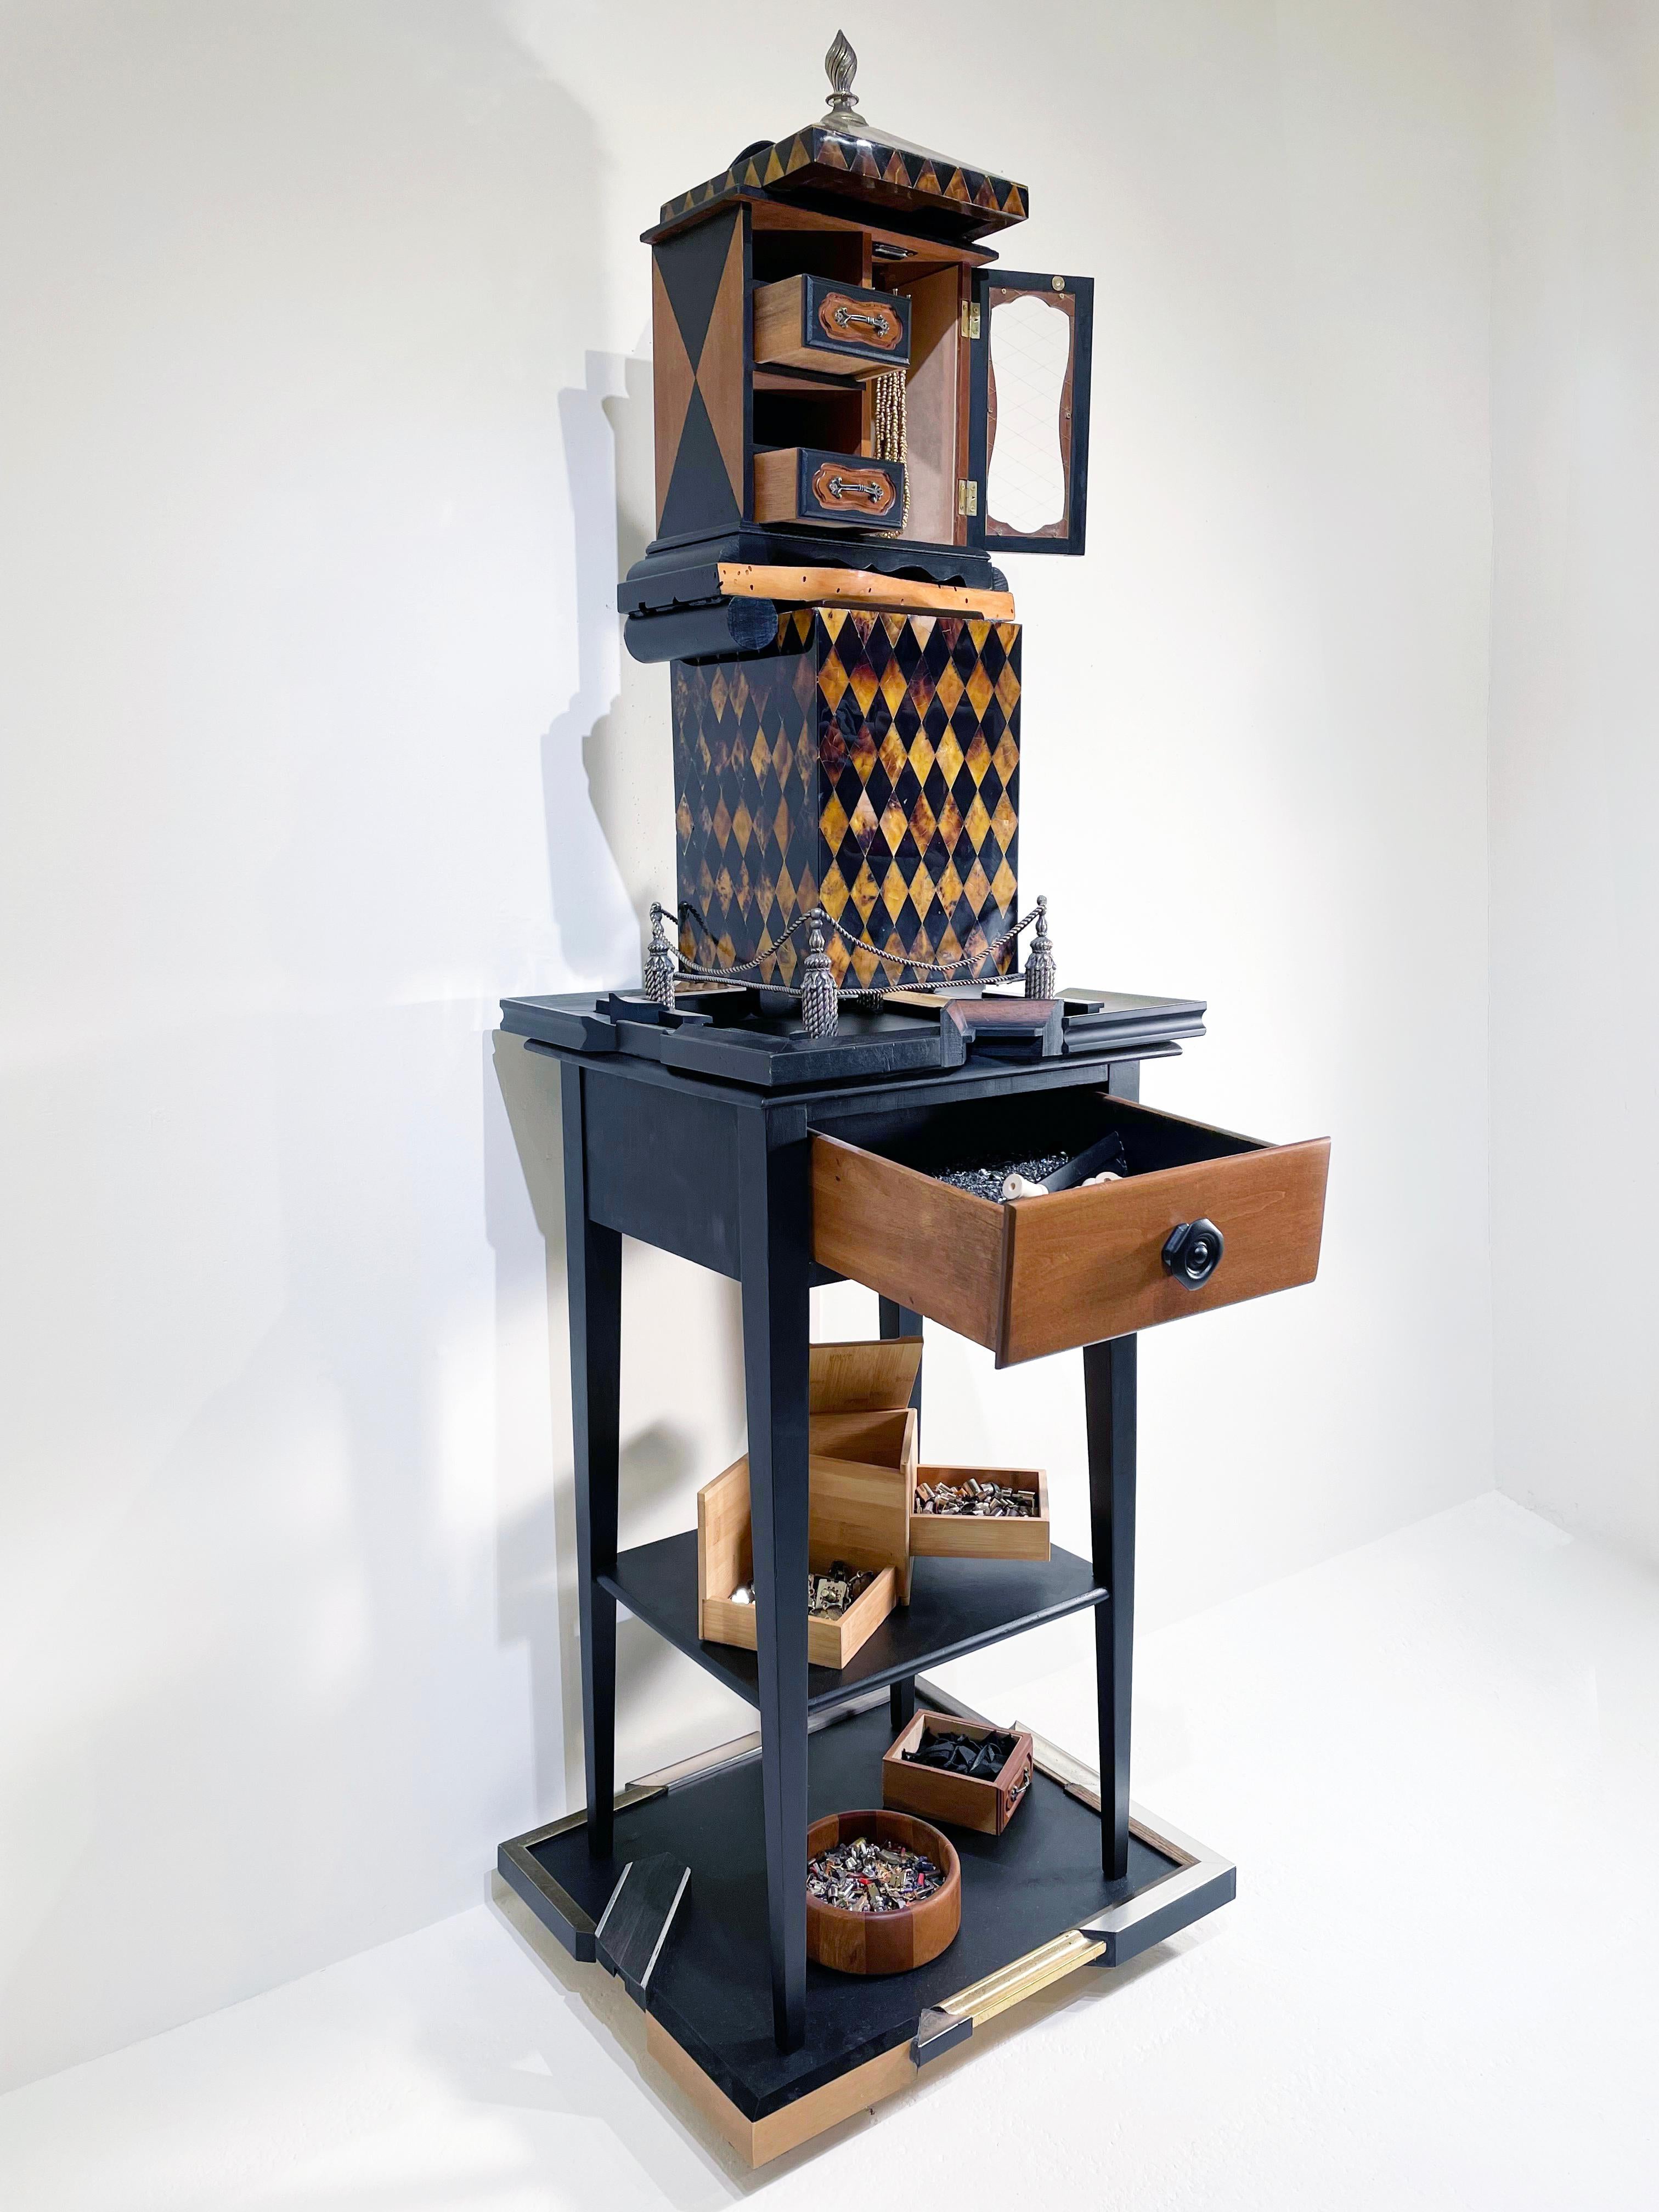 Components for Transitioning from Home 1143  - Cabinet of Curiosities Sculpture - Brown Abstract Sculpture by Linda Stein